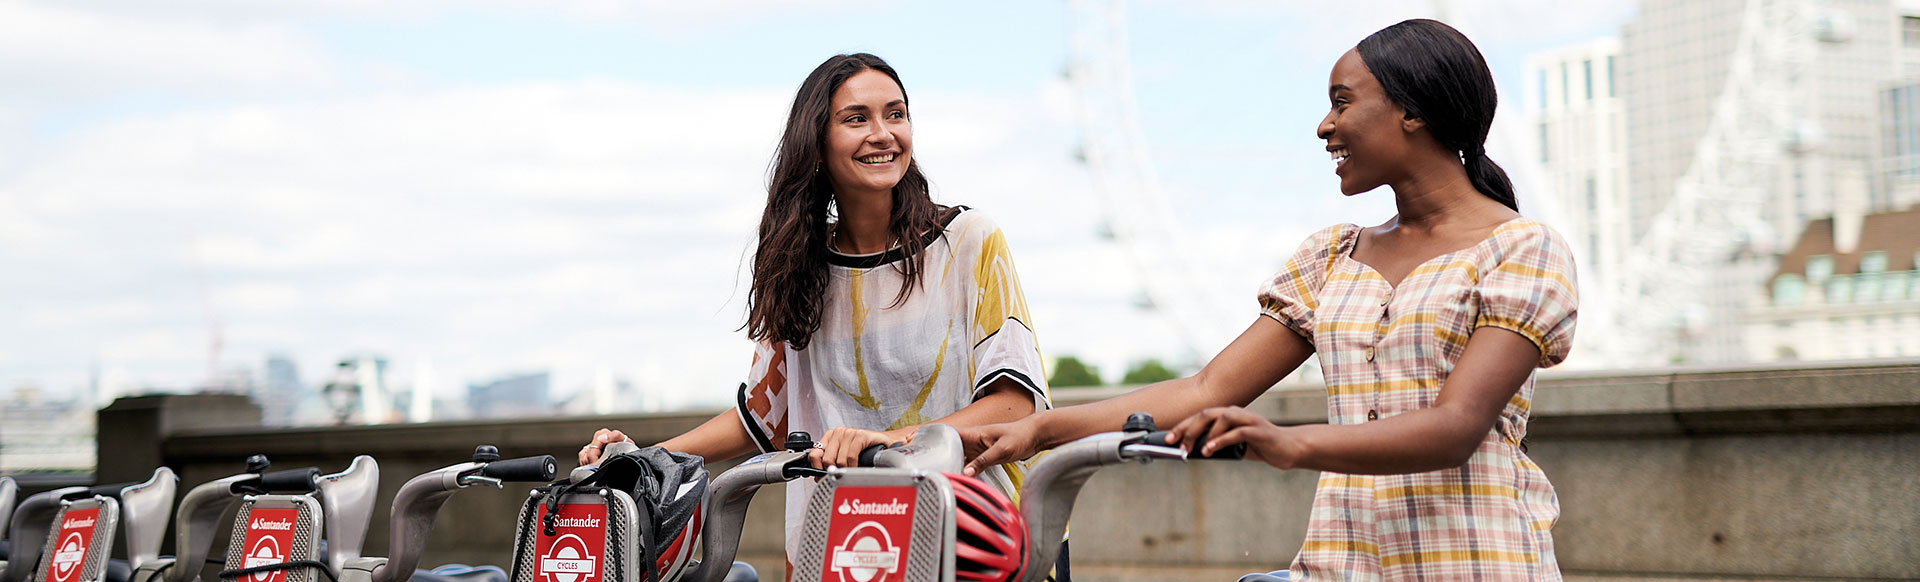 Two ladies in short-sleeved clothing smile at each other while holding a Santander Cycles bicycle each, with the London Eye in the background.